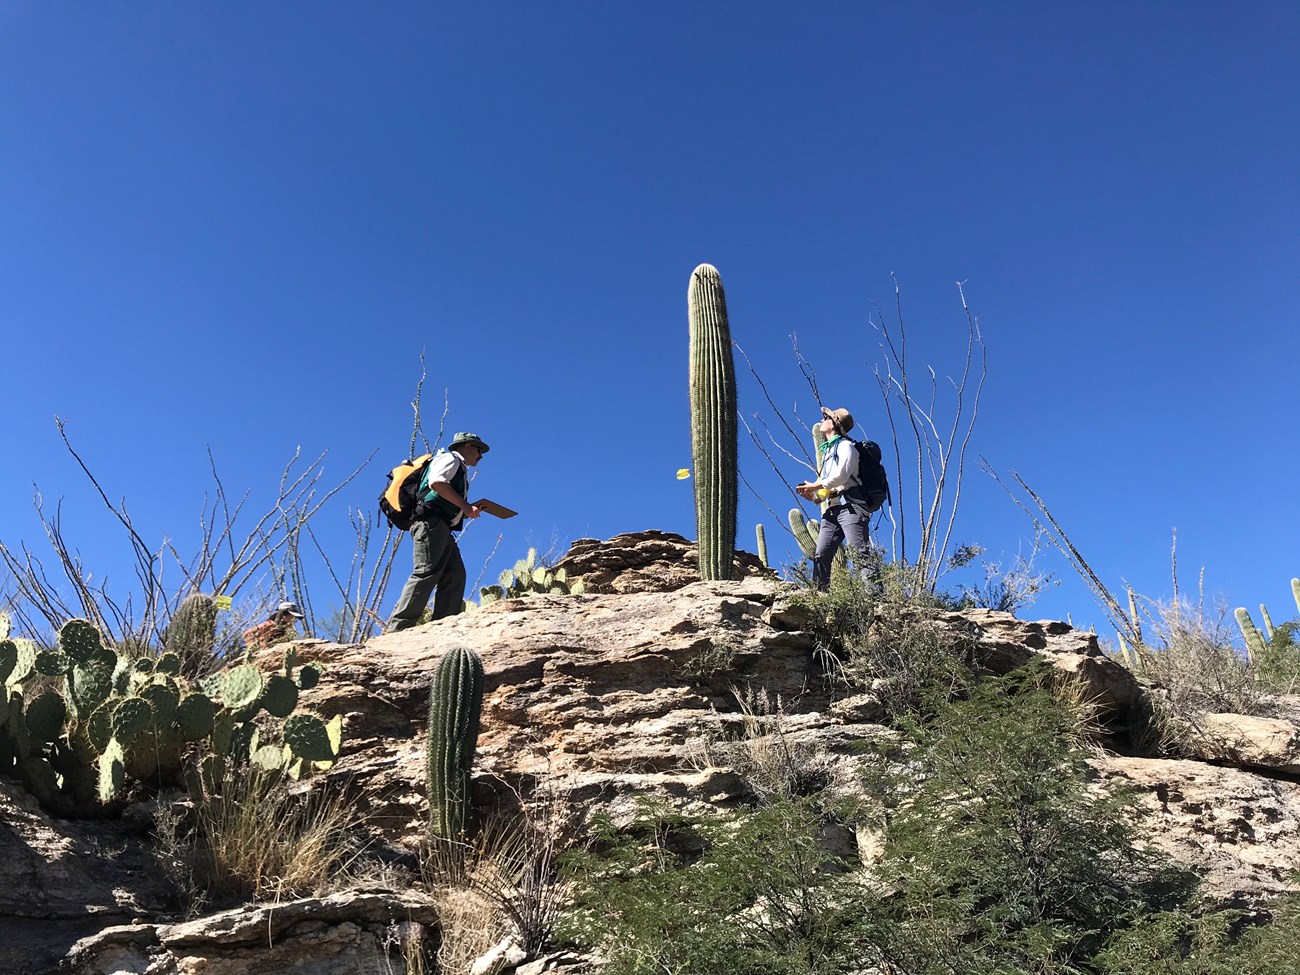 Park staff out in the desert doing saguaro census